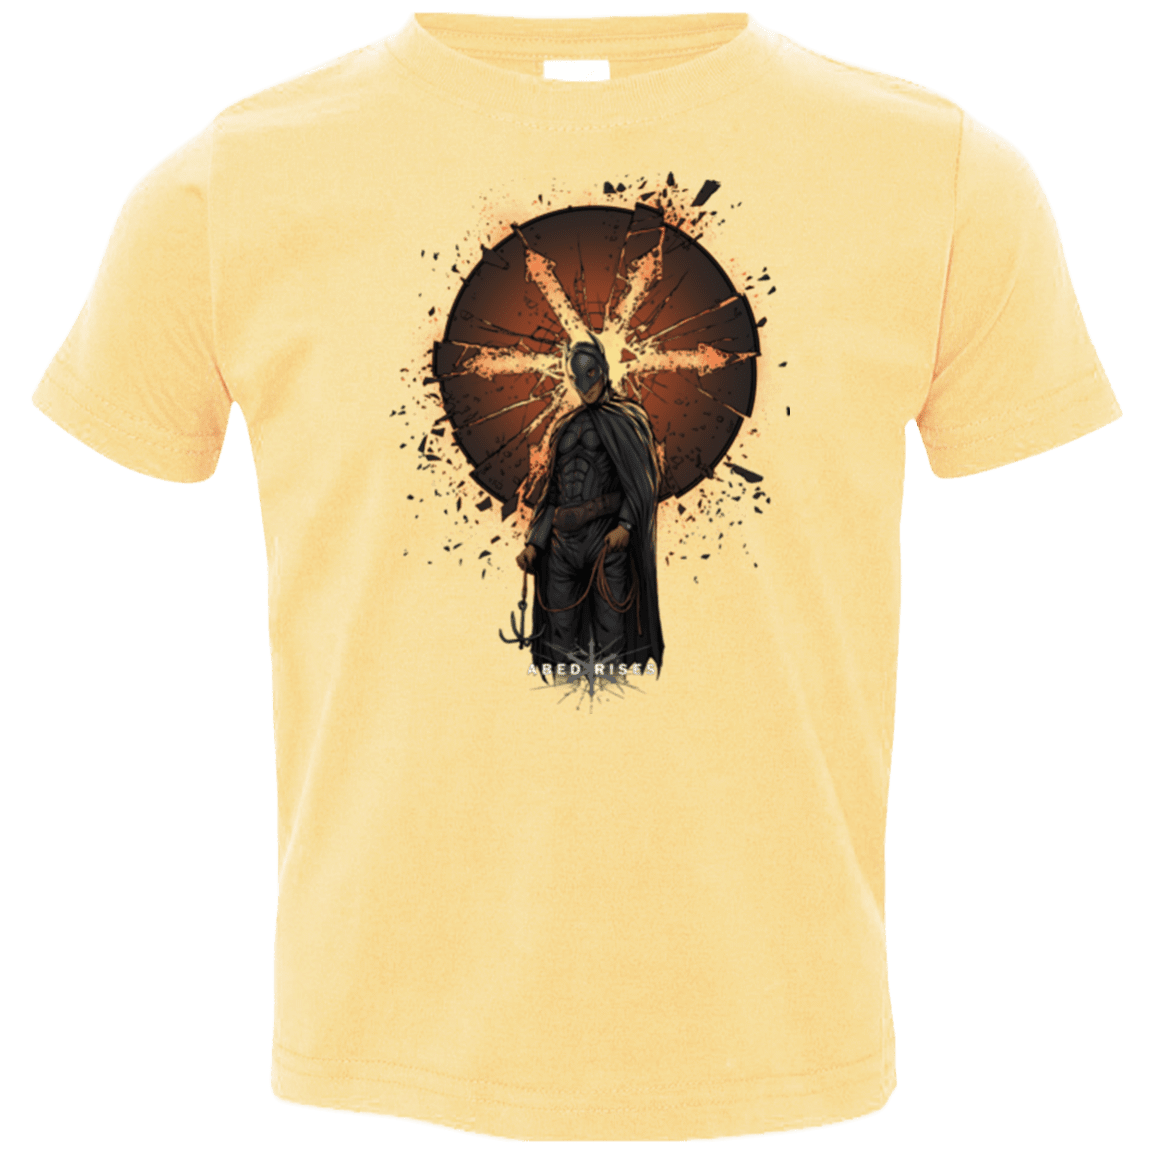 T-Shirts Butter / 2T Abed Rises Toddler Premium T-Shirt